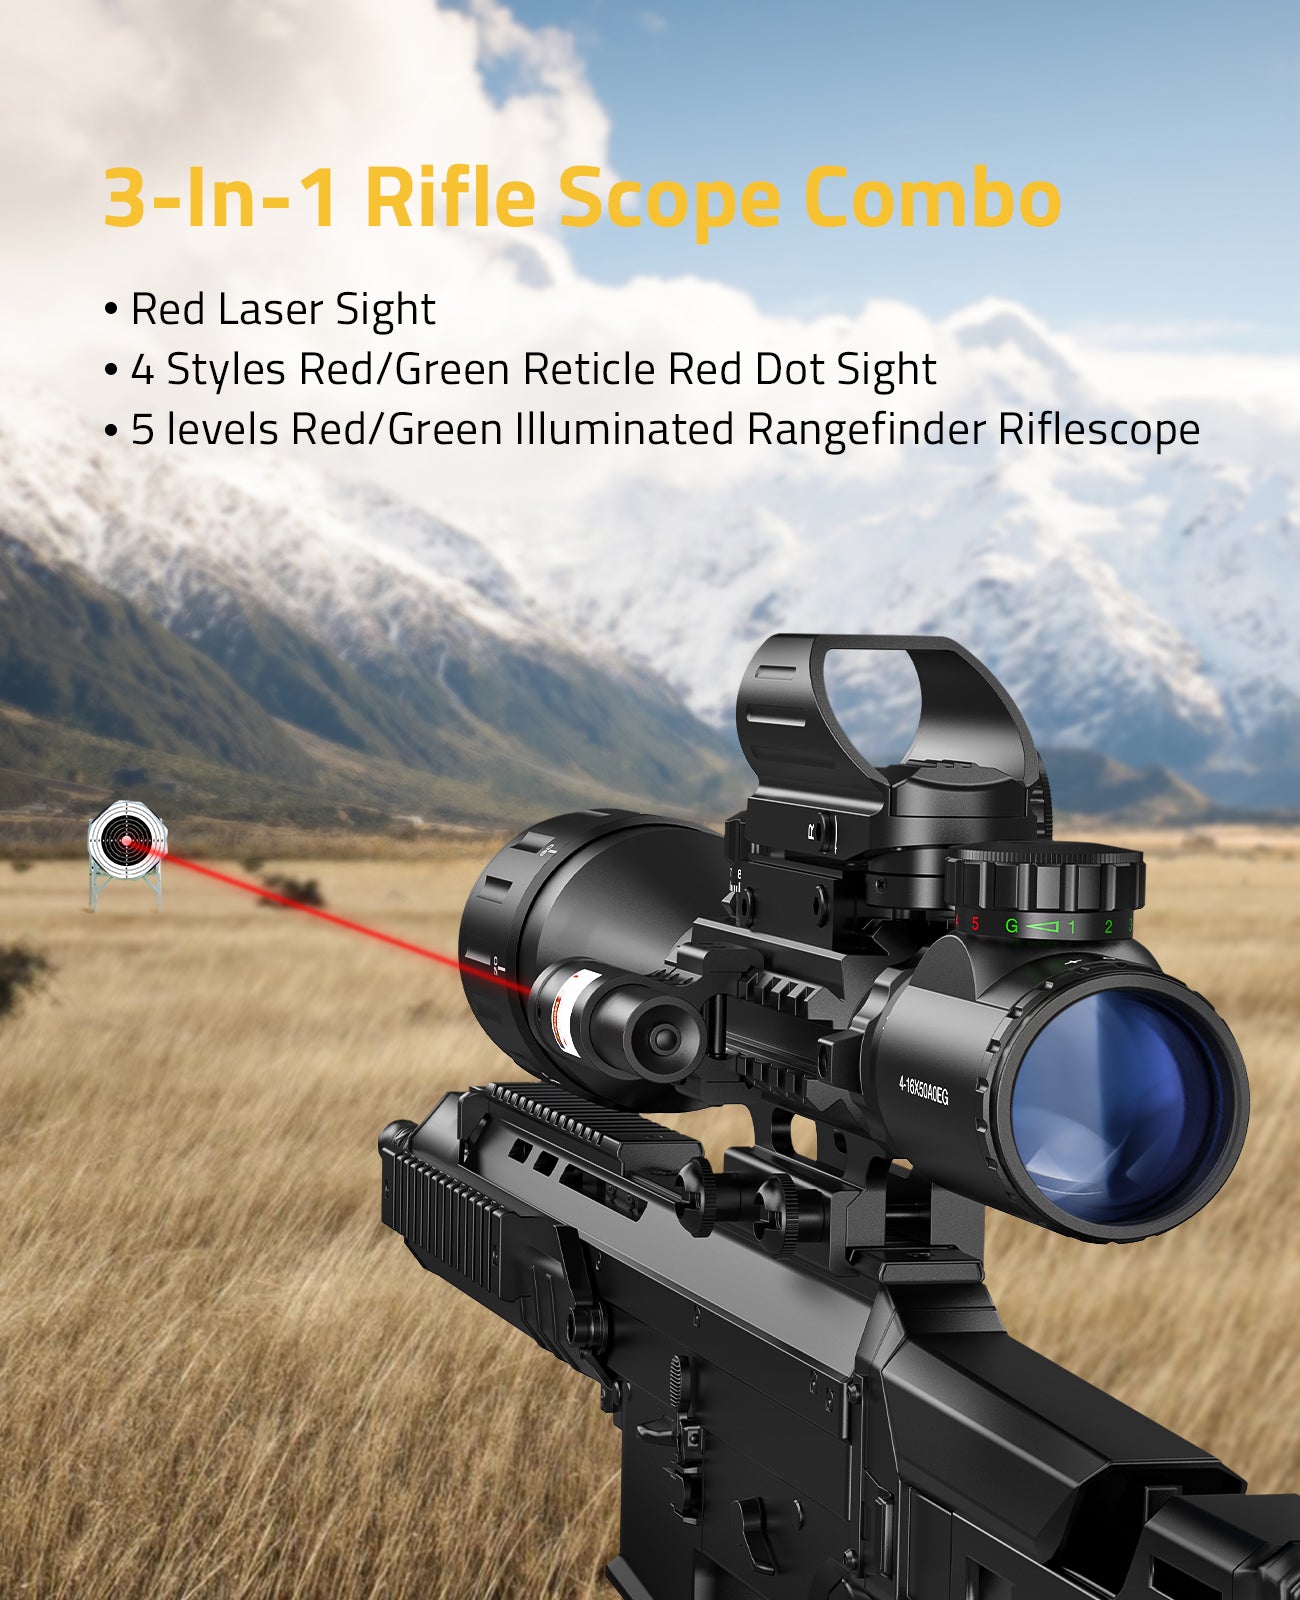 3-in-1 Rifle Scope Combo with Red Laser Sight, Red Dot Sight and Illuminated Riflescope